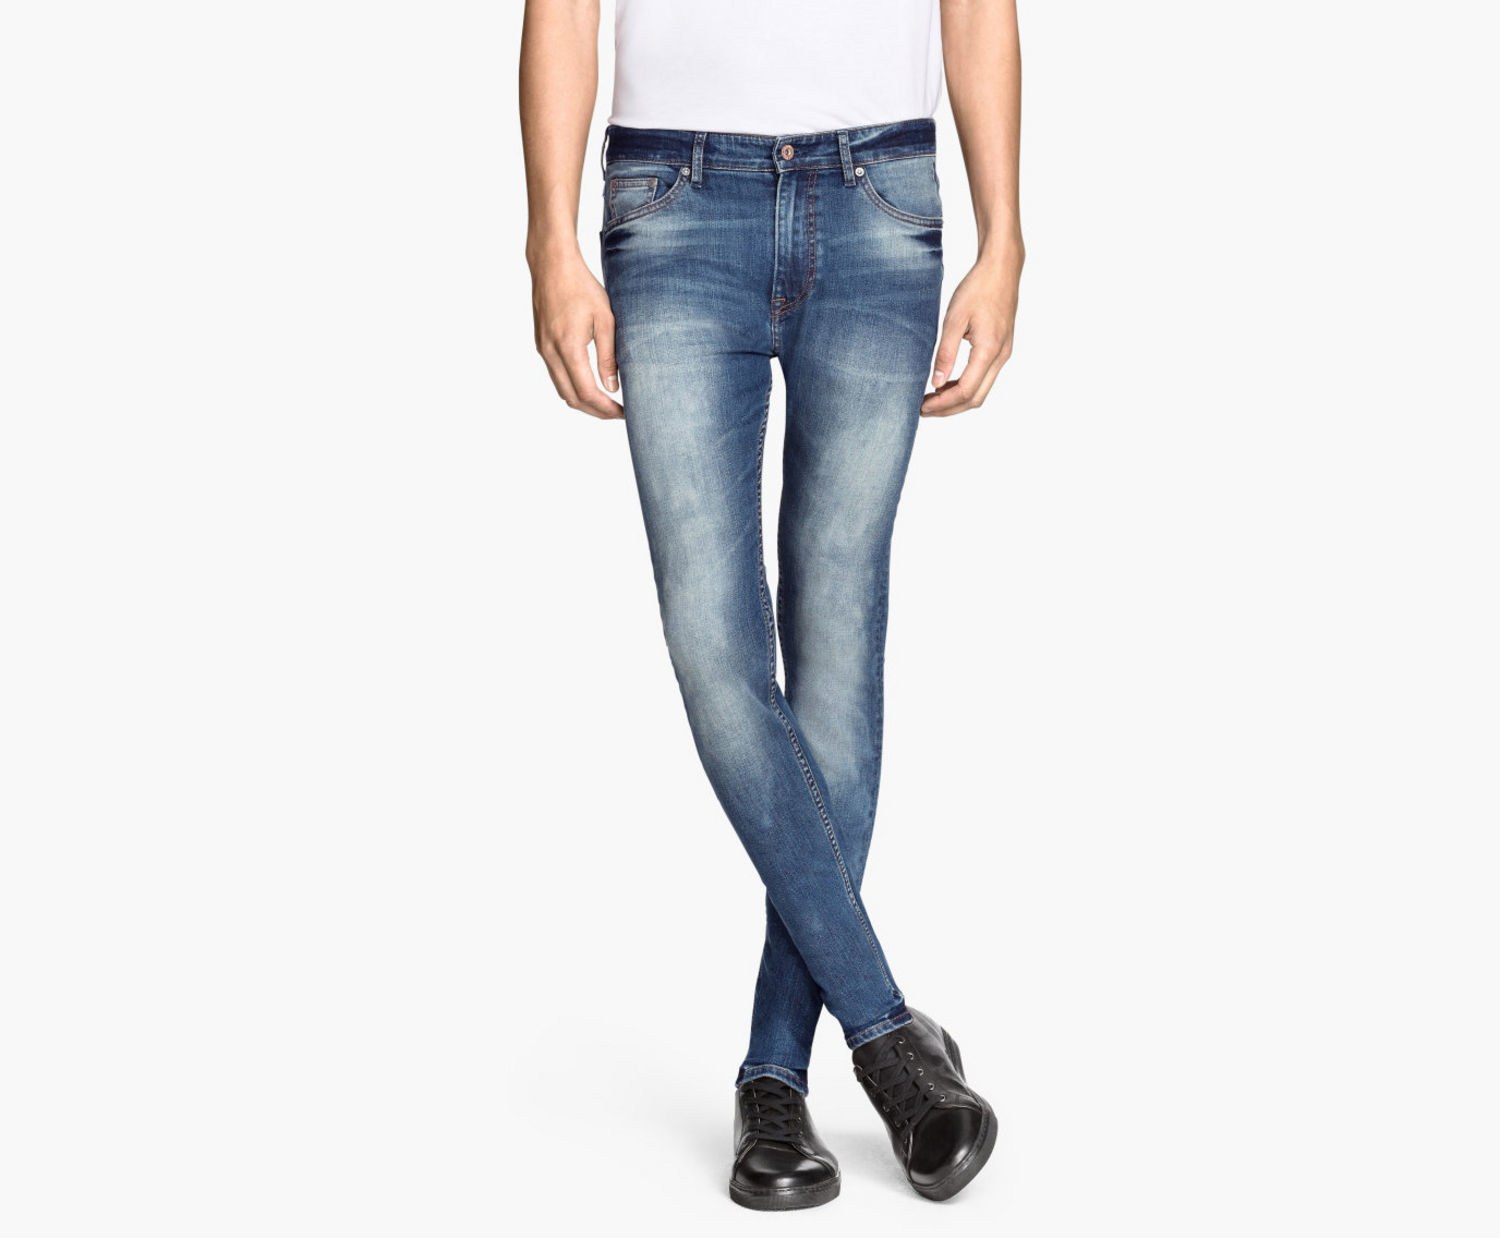 skinny jeans for male